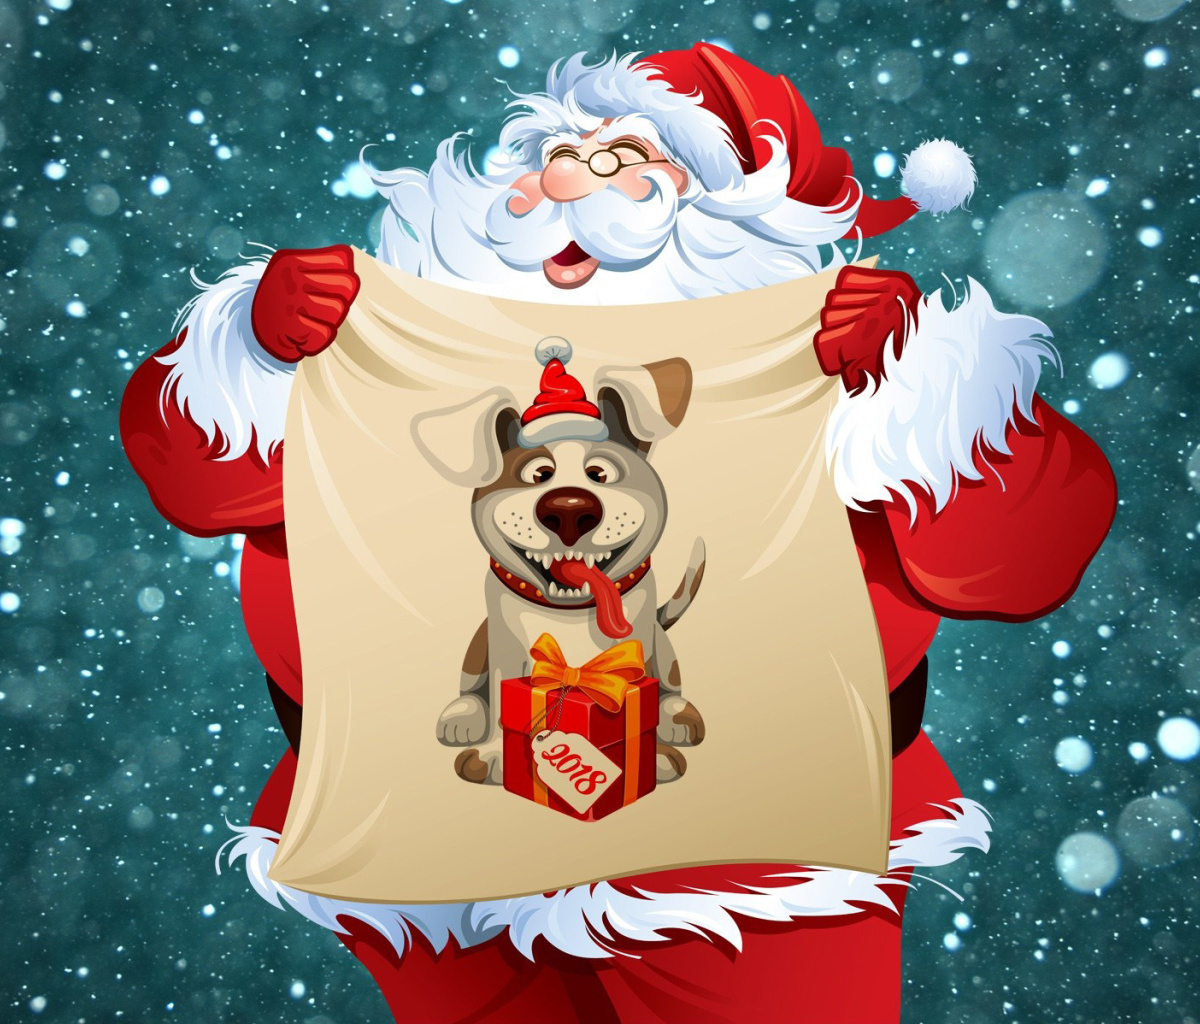 Das Happy New Year 2018 with Dog and Santa Wallpaper 1200x1024